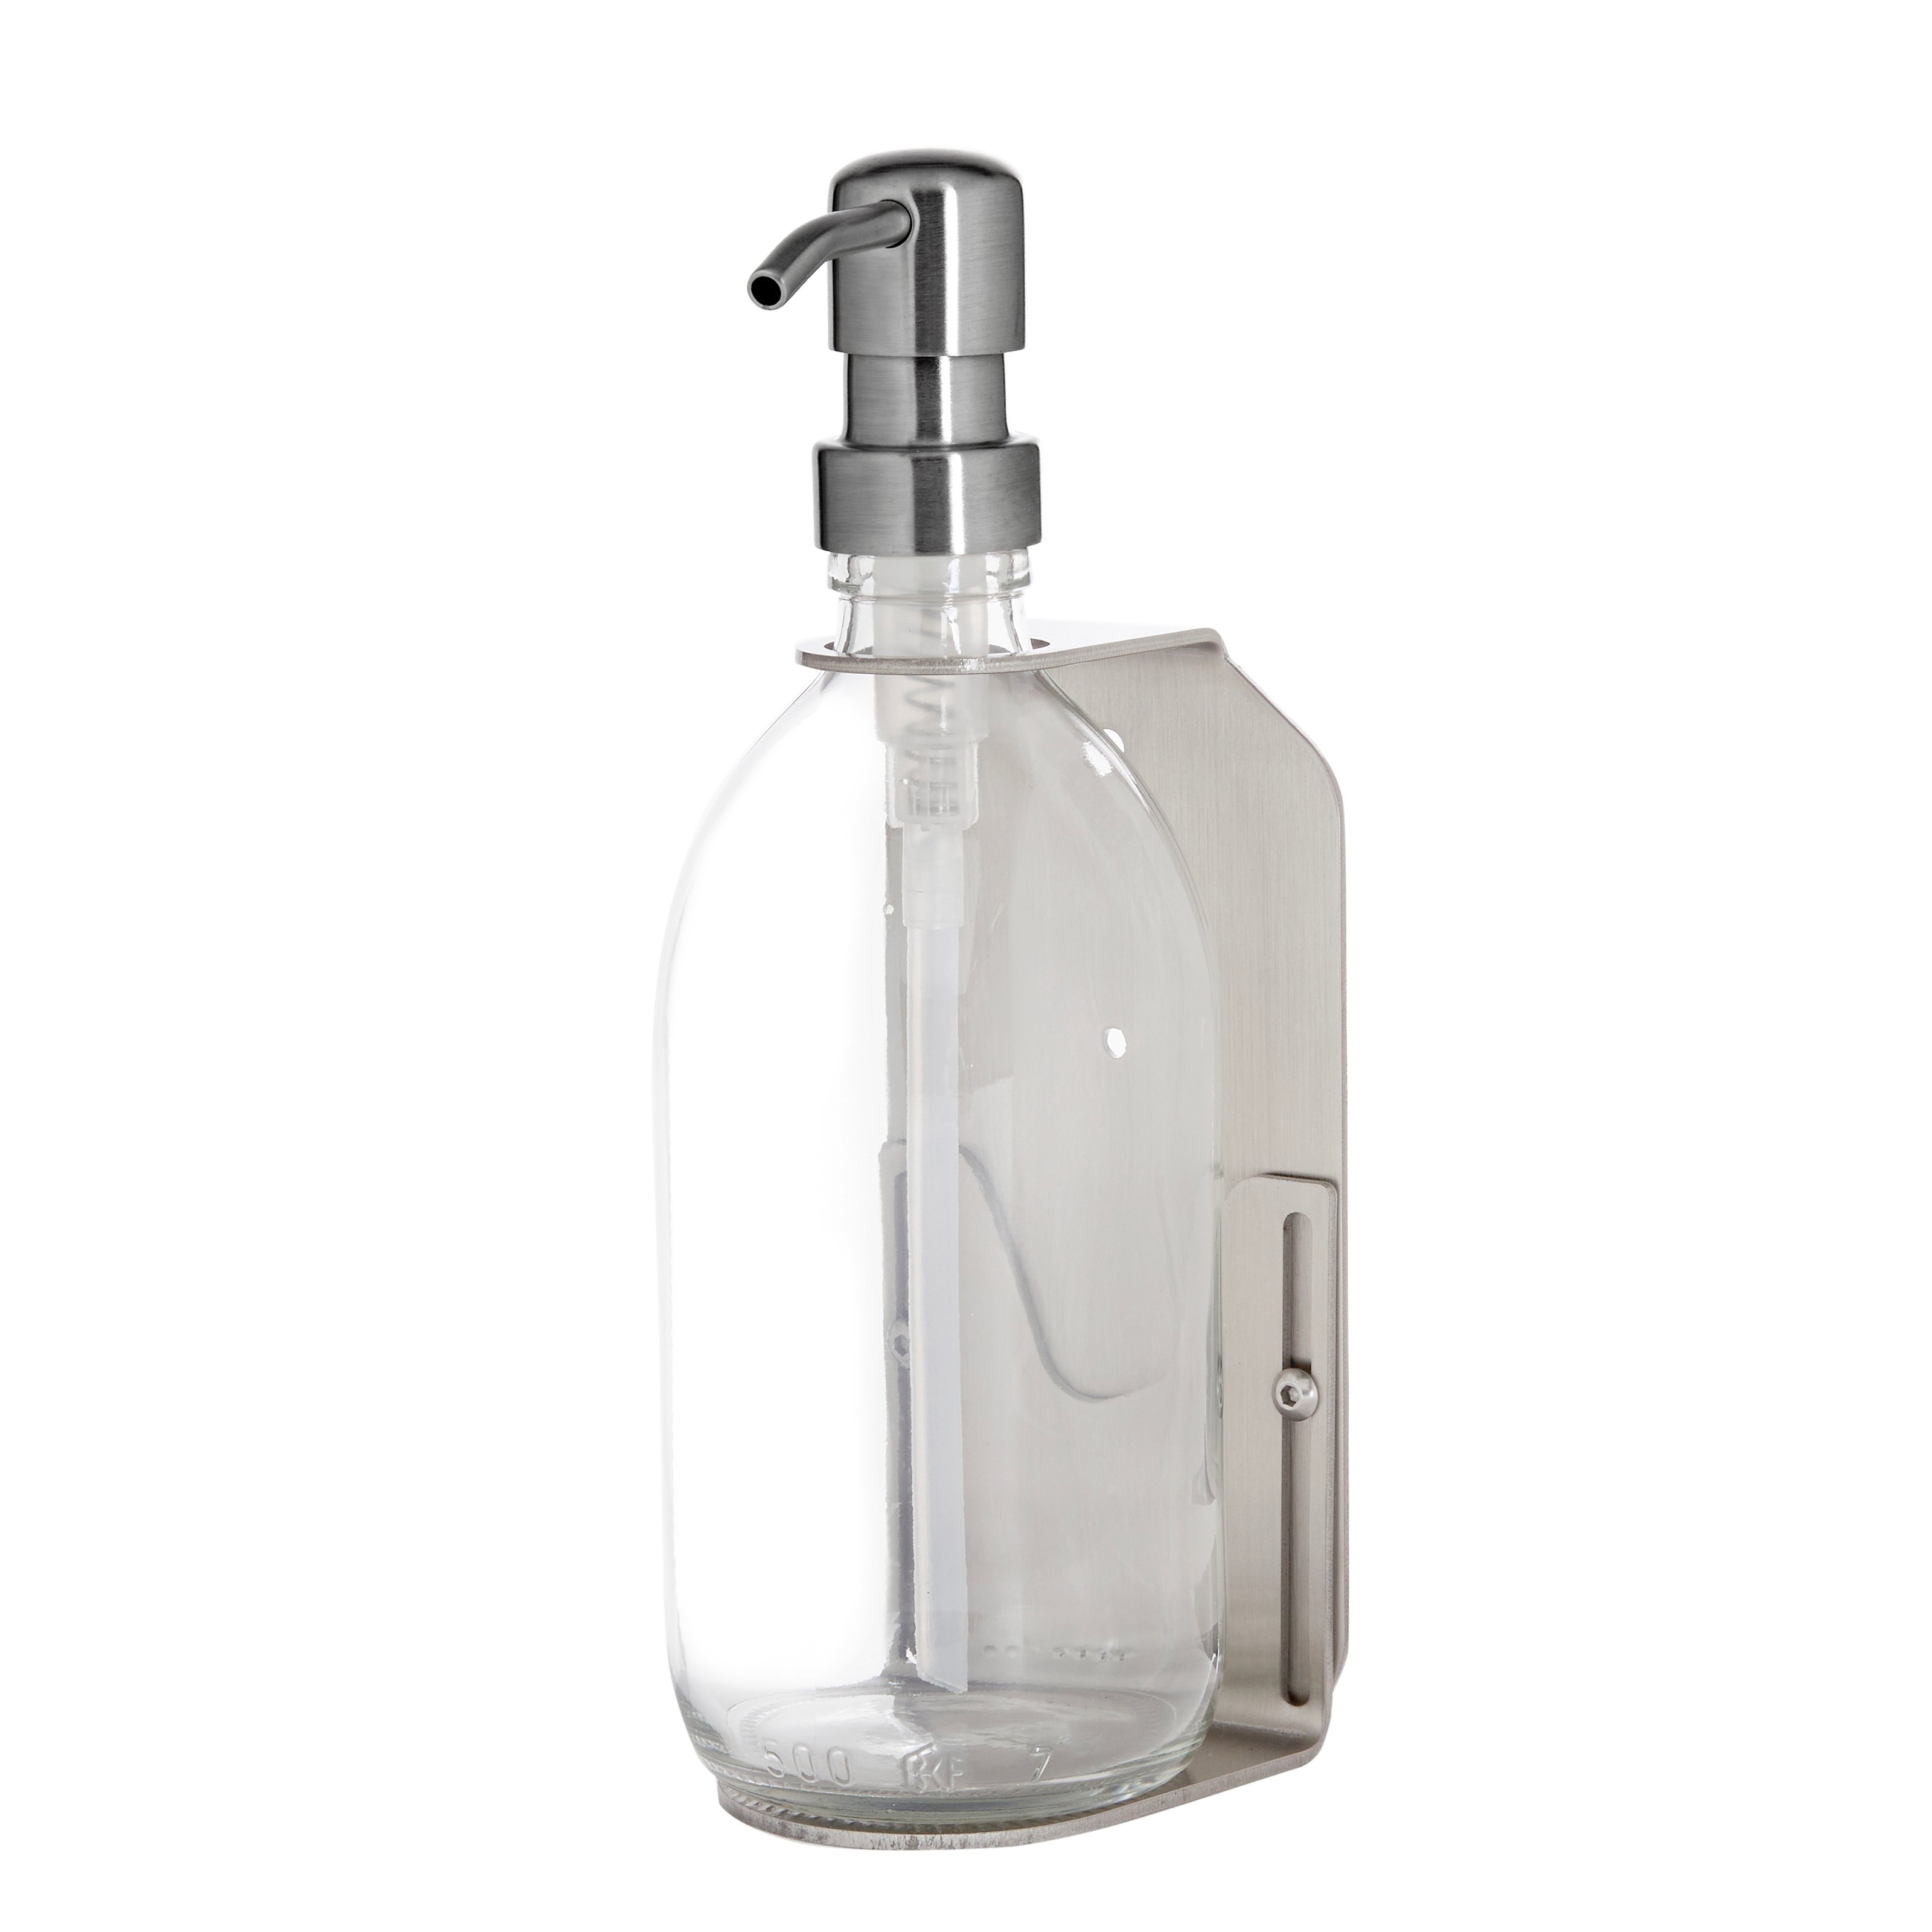 Satin Silver Wall mounted soap Dispenser with clear dispenser and matching silver pump